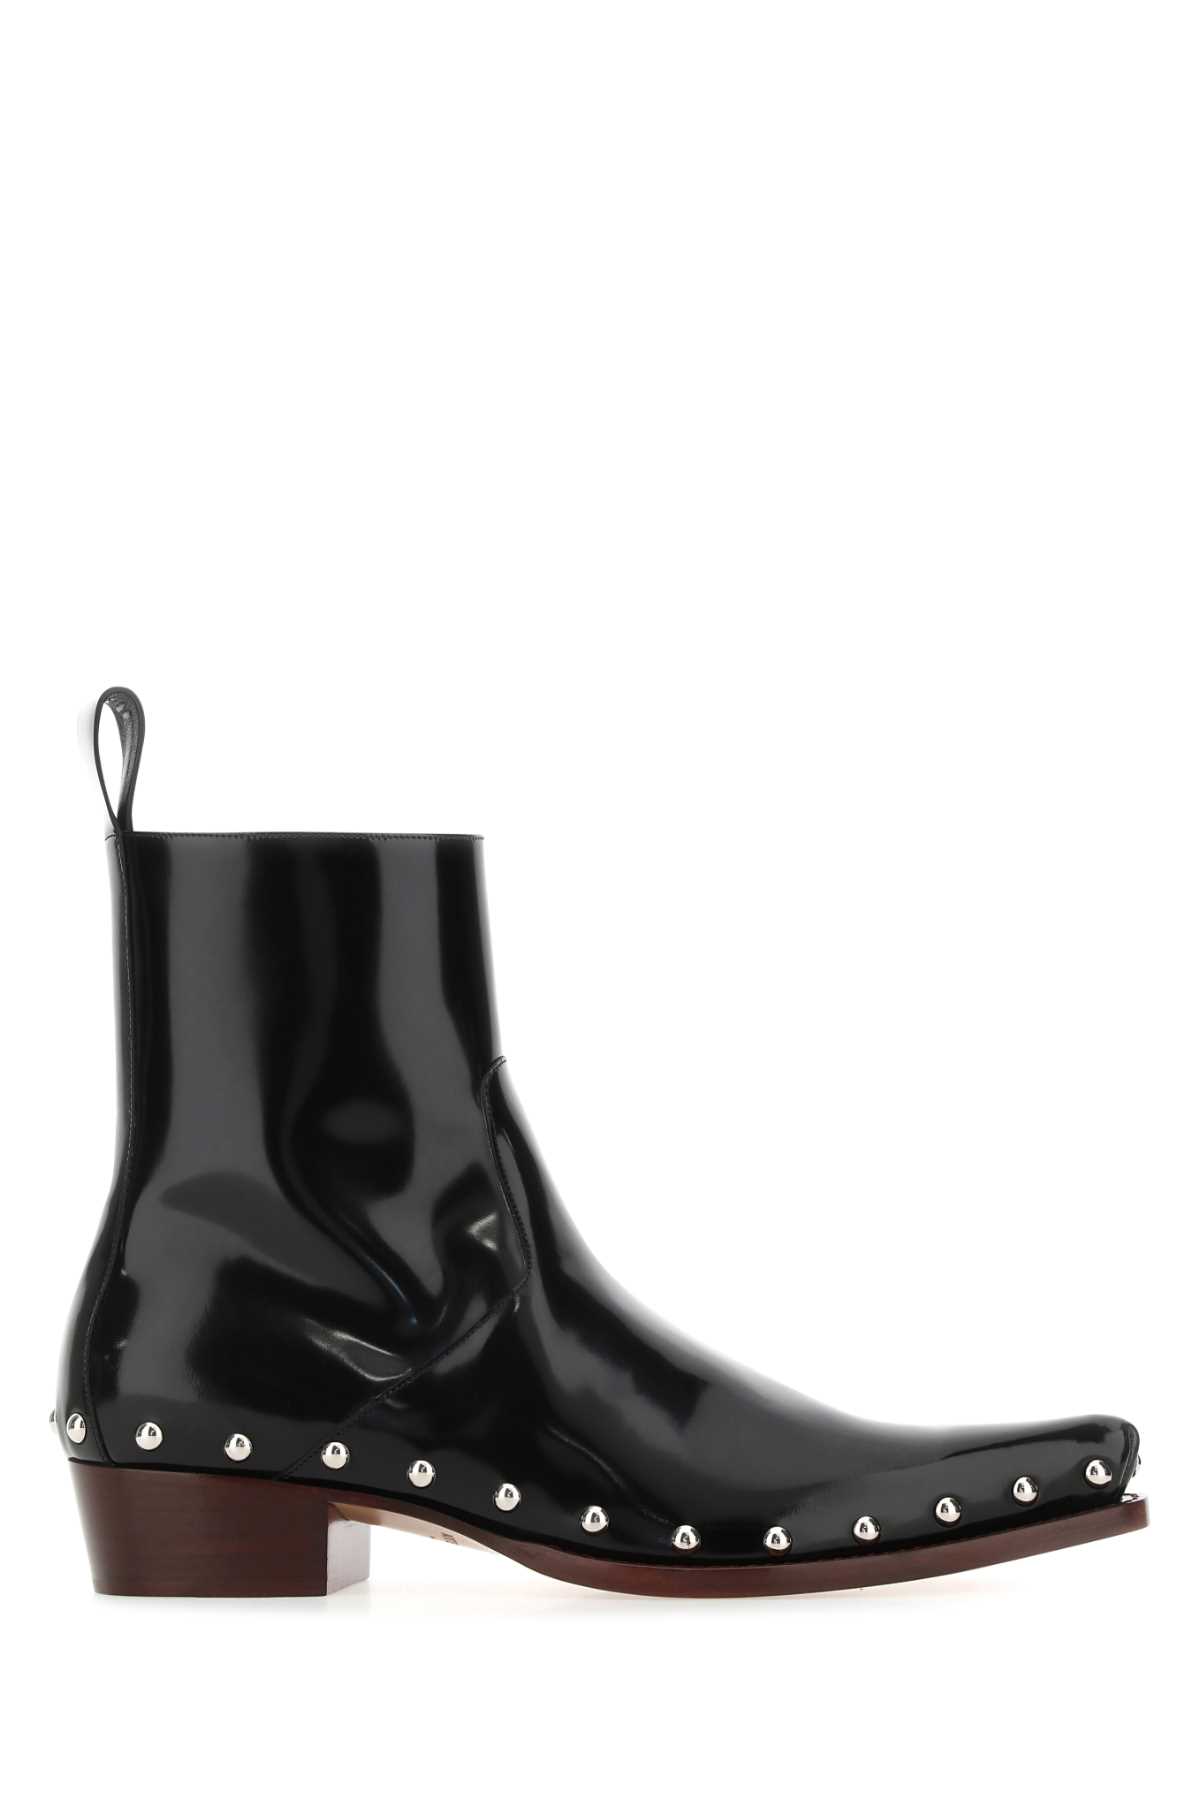 Ripley Ankle Boots